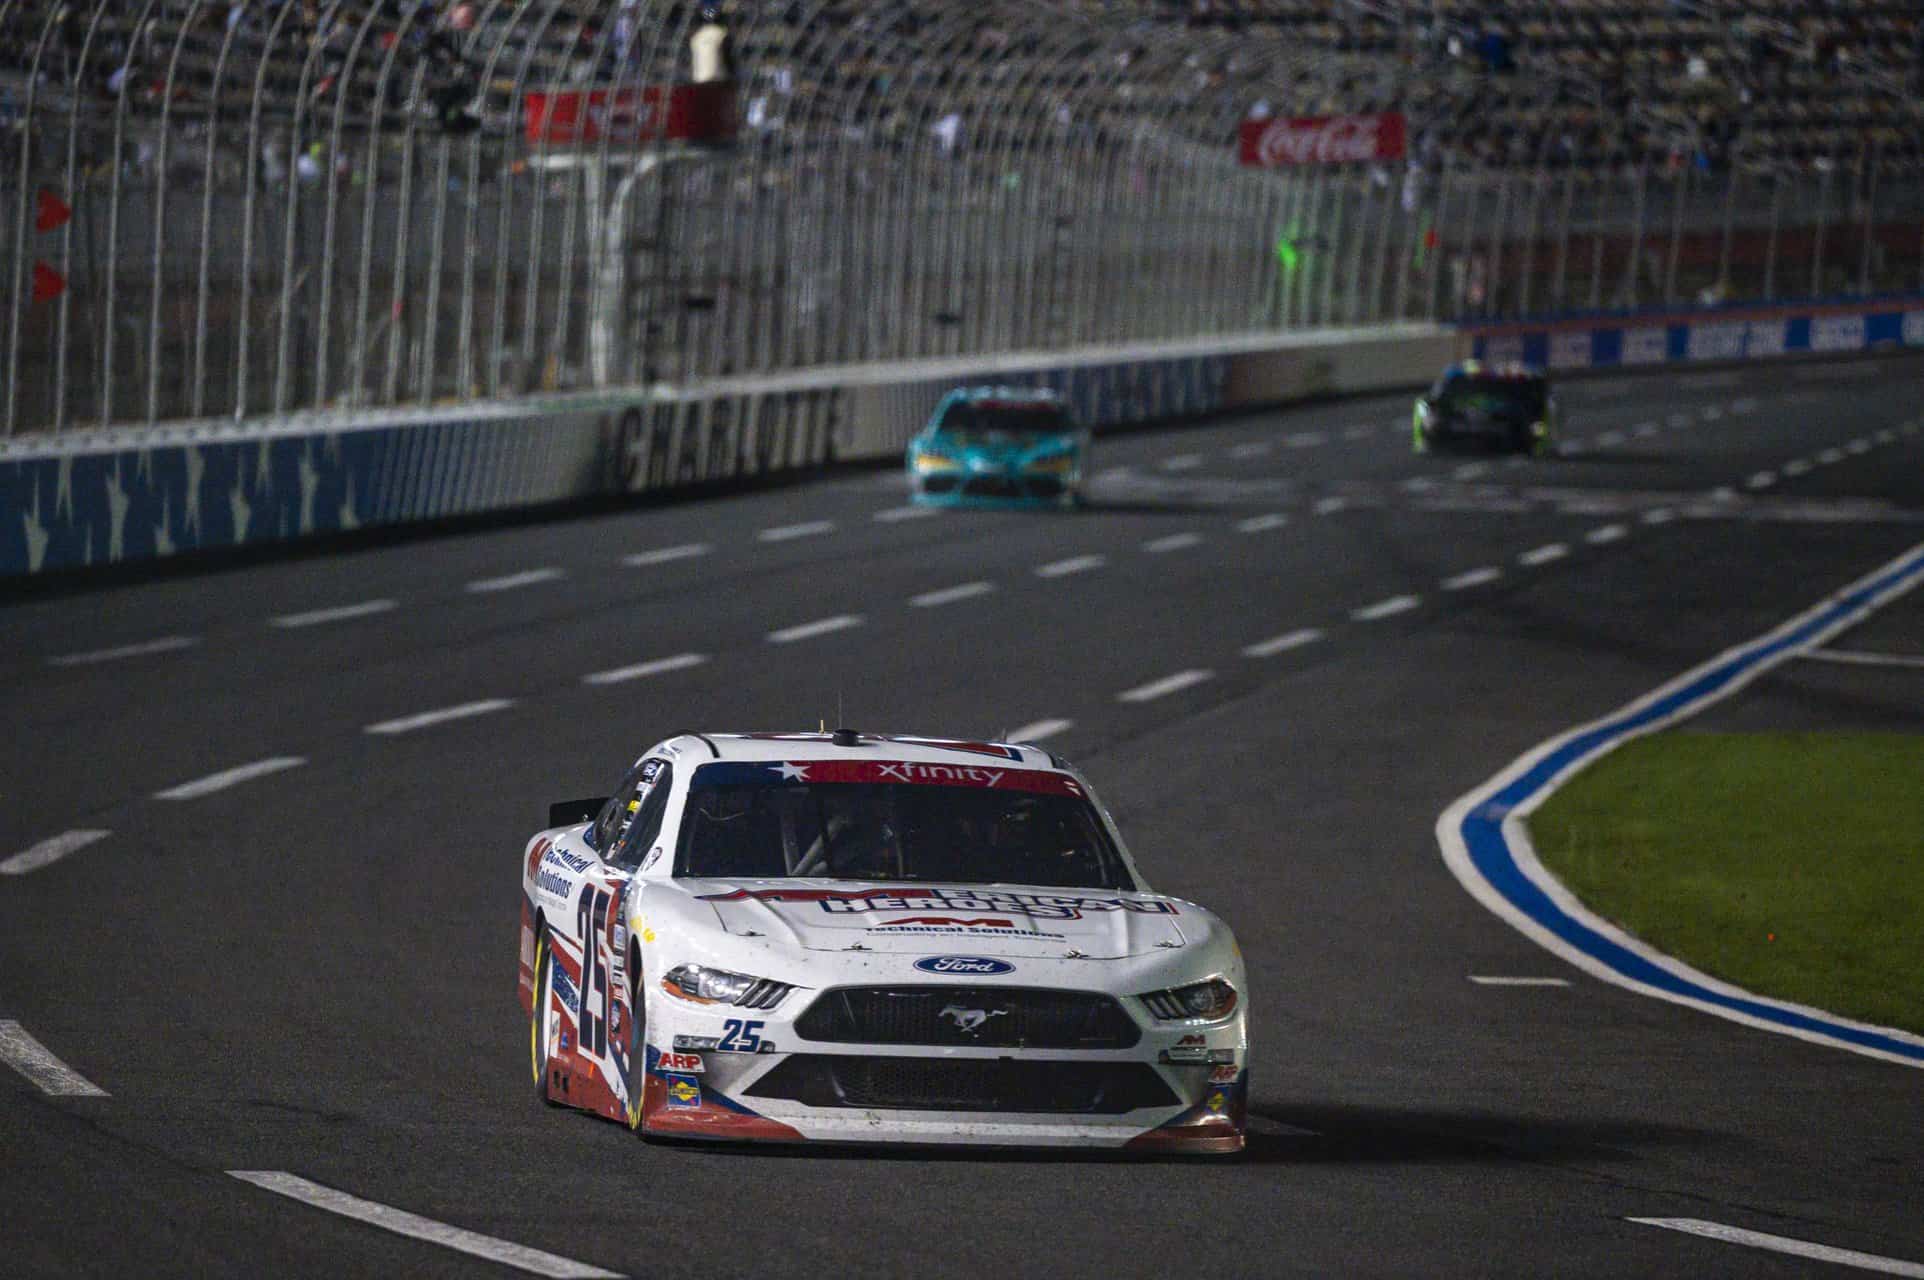 Brett Moffitt races at Charlotte Motor Speedway in the NASCAR Xfinity Series for AM Racing in 2023.